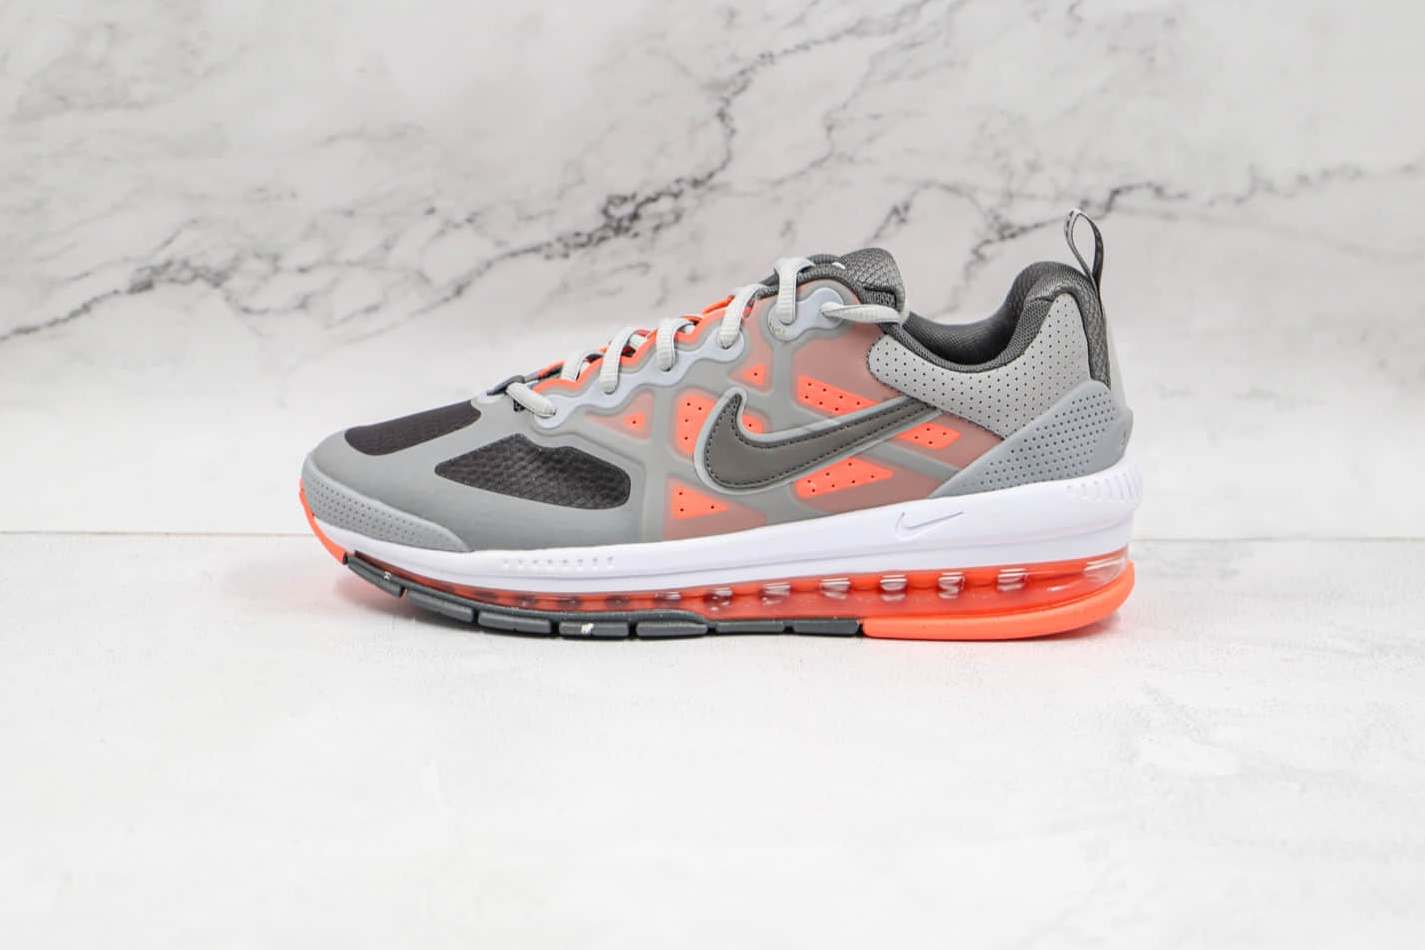 Nike Air Max Genome 'Light Smoke Grey Bright Mango' CW1648-004 - Stylish and Versatile Sneakers for Men and Women